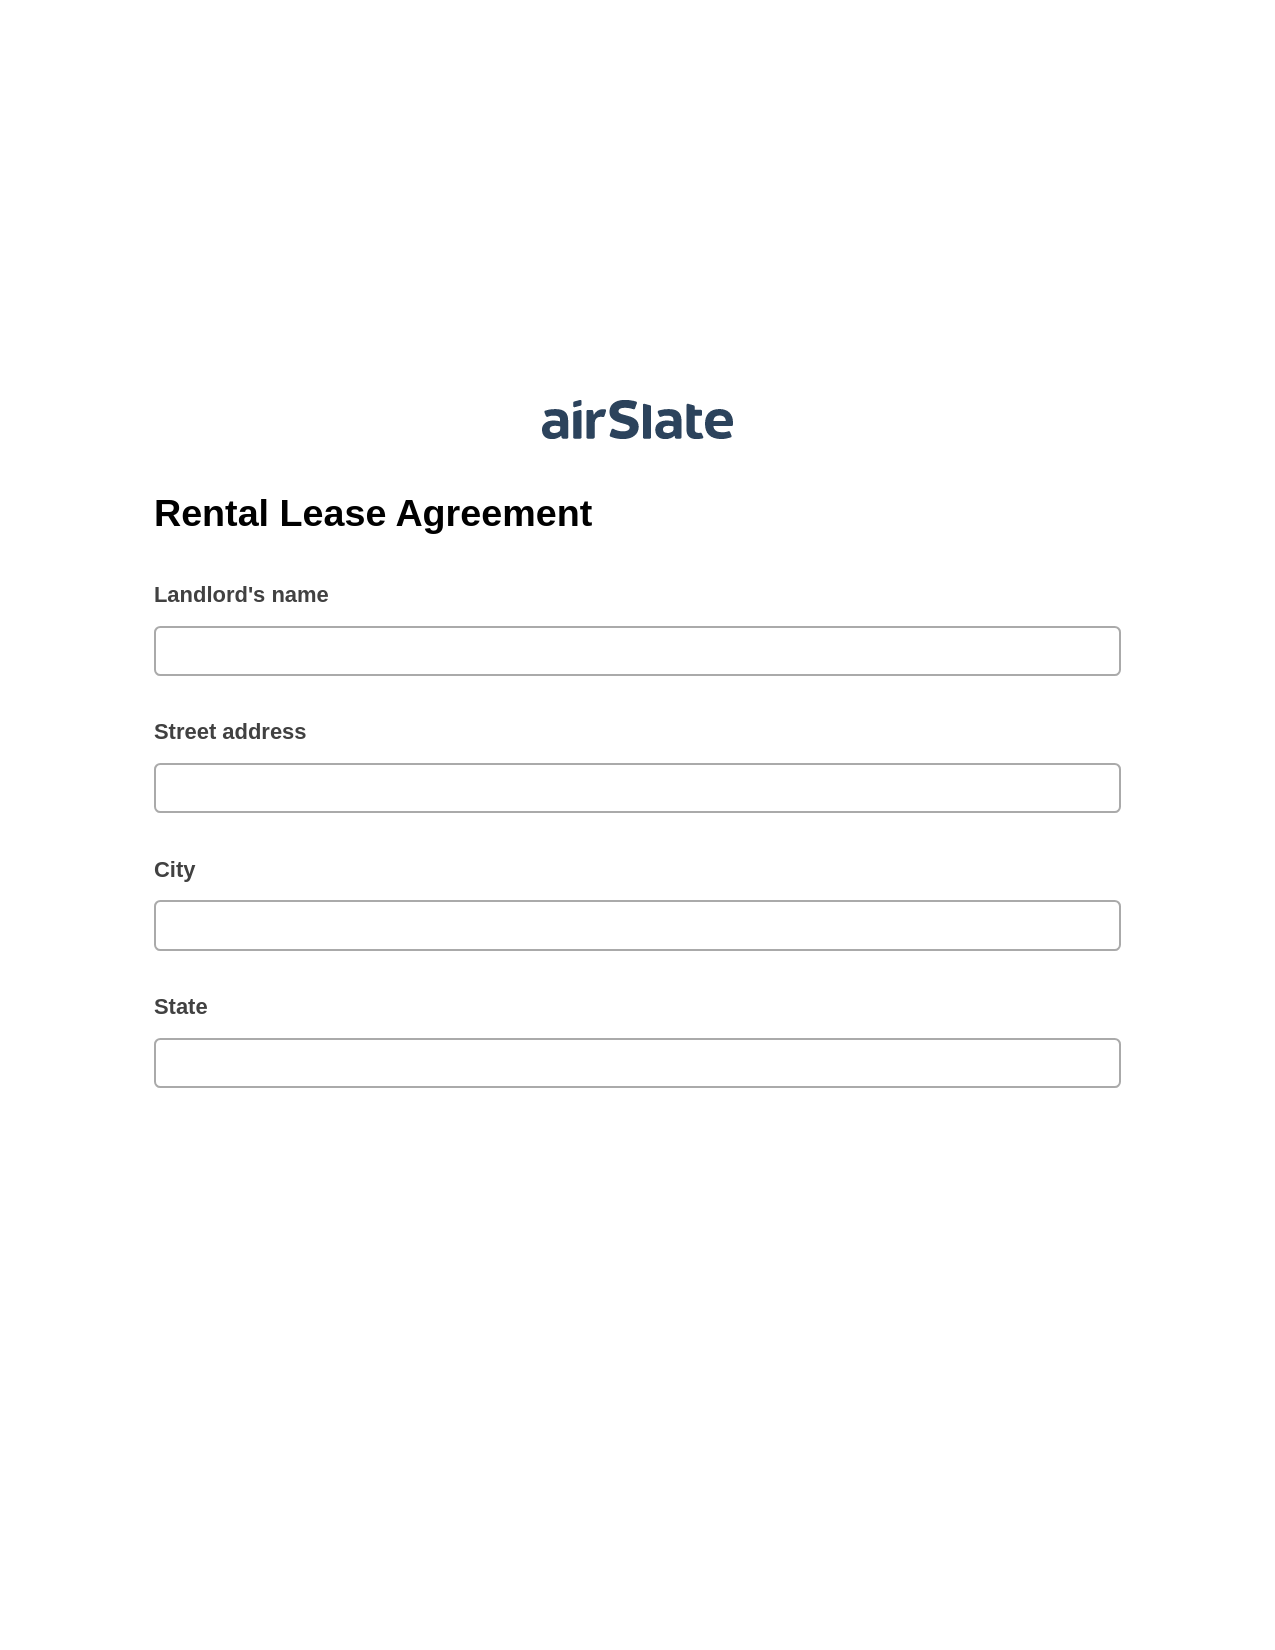 Rental Lease Agreement Pre-fill from Google Sheets Bot, Invoke Salesforce Process Bot, Post-finish Document Bot